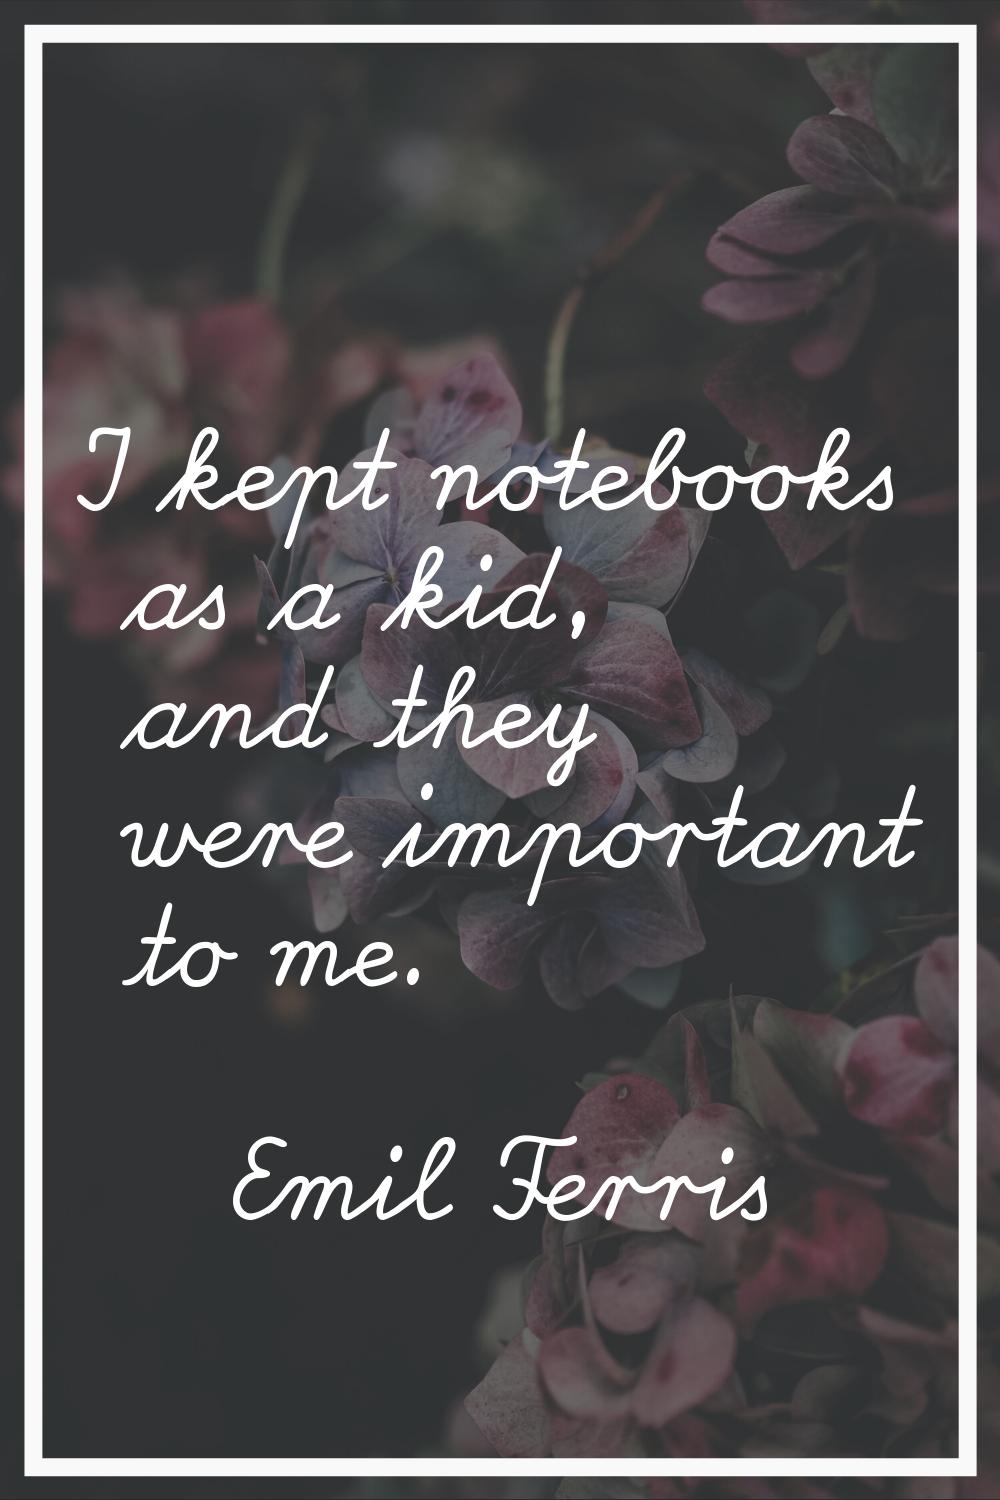 I kept notebooks as a kid, and they were important to me.